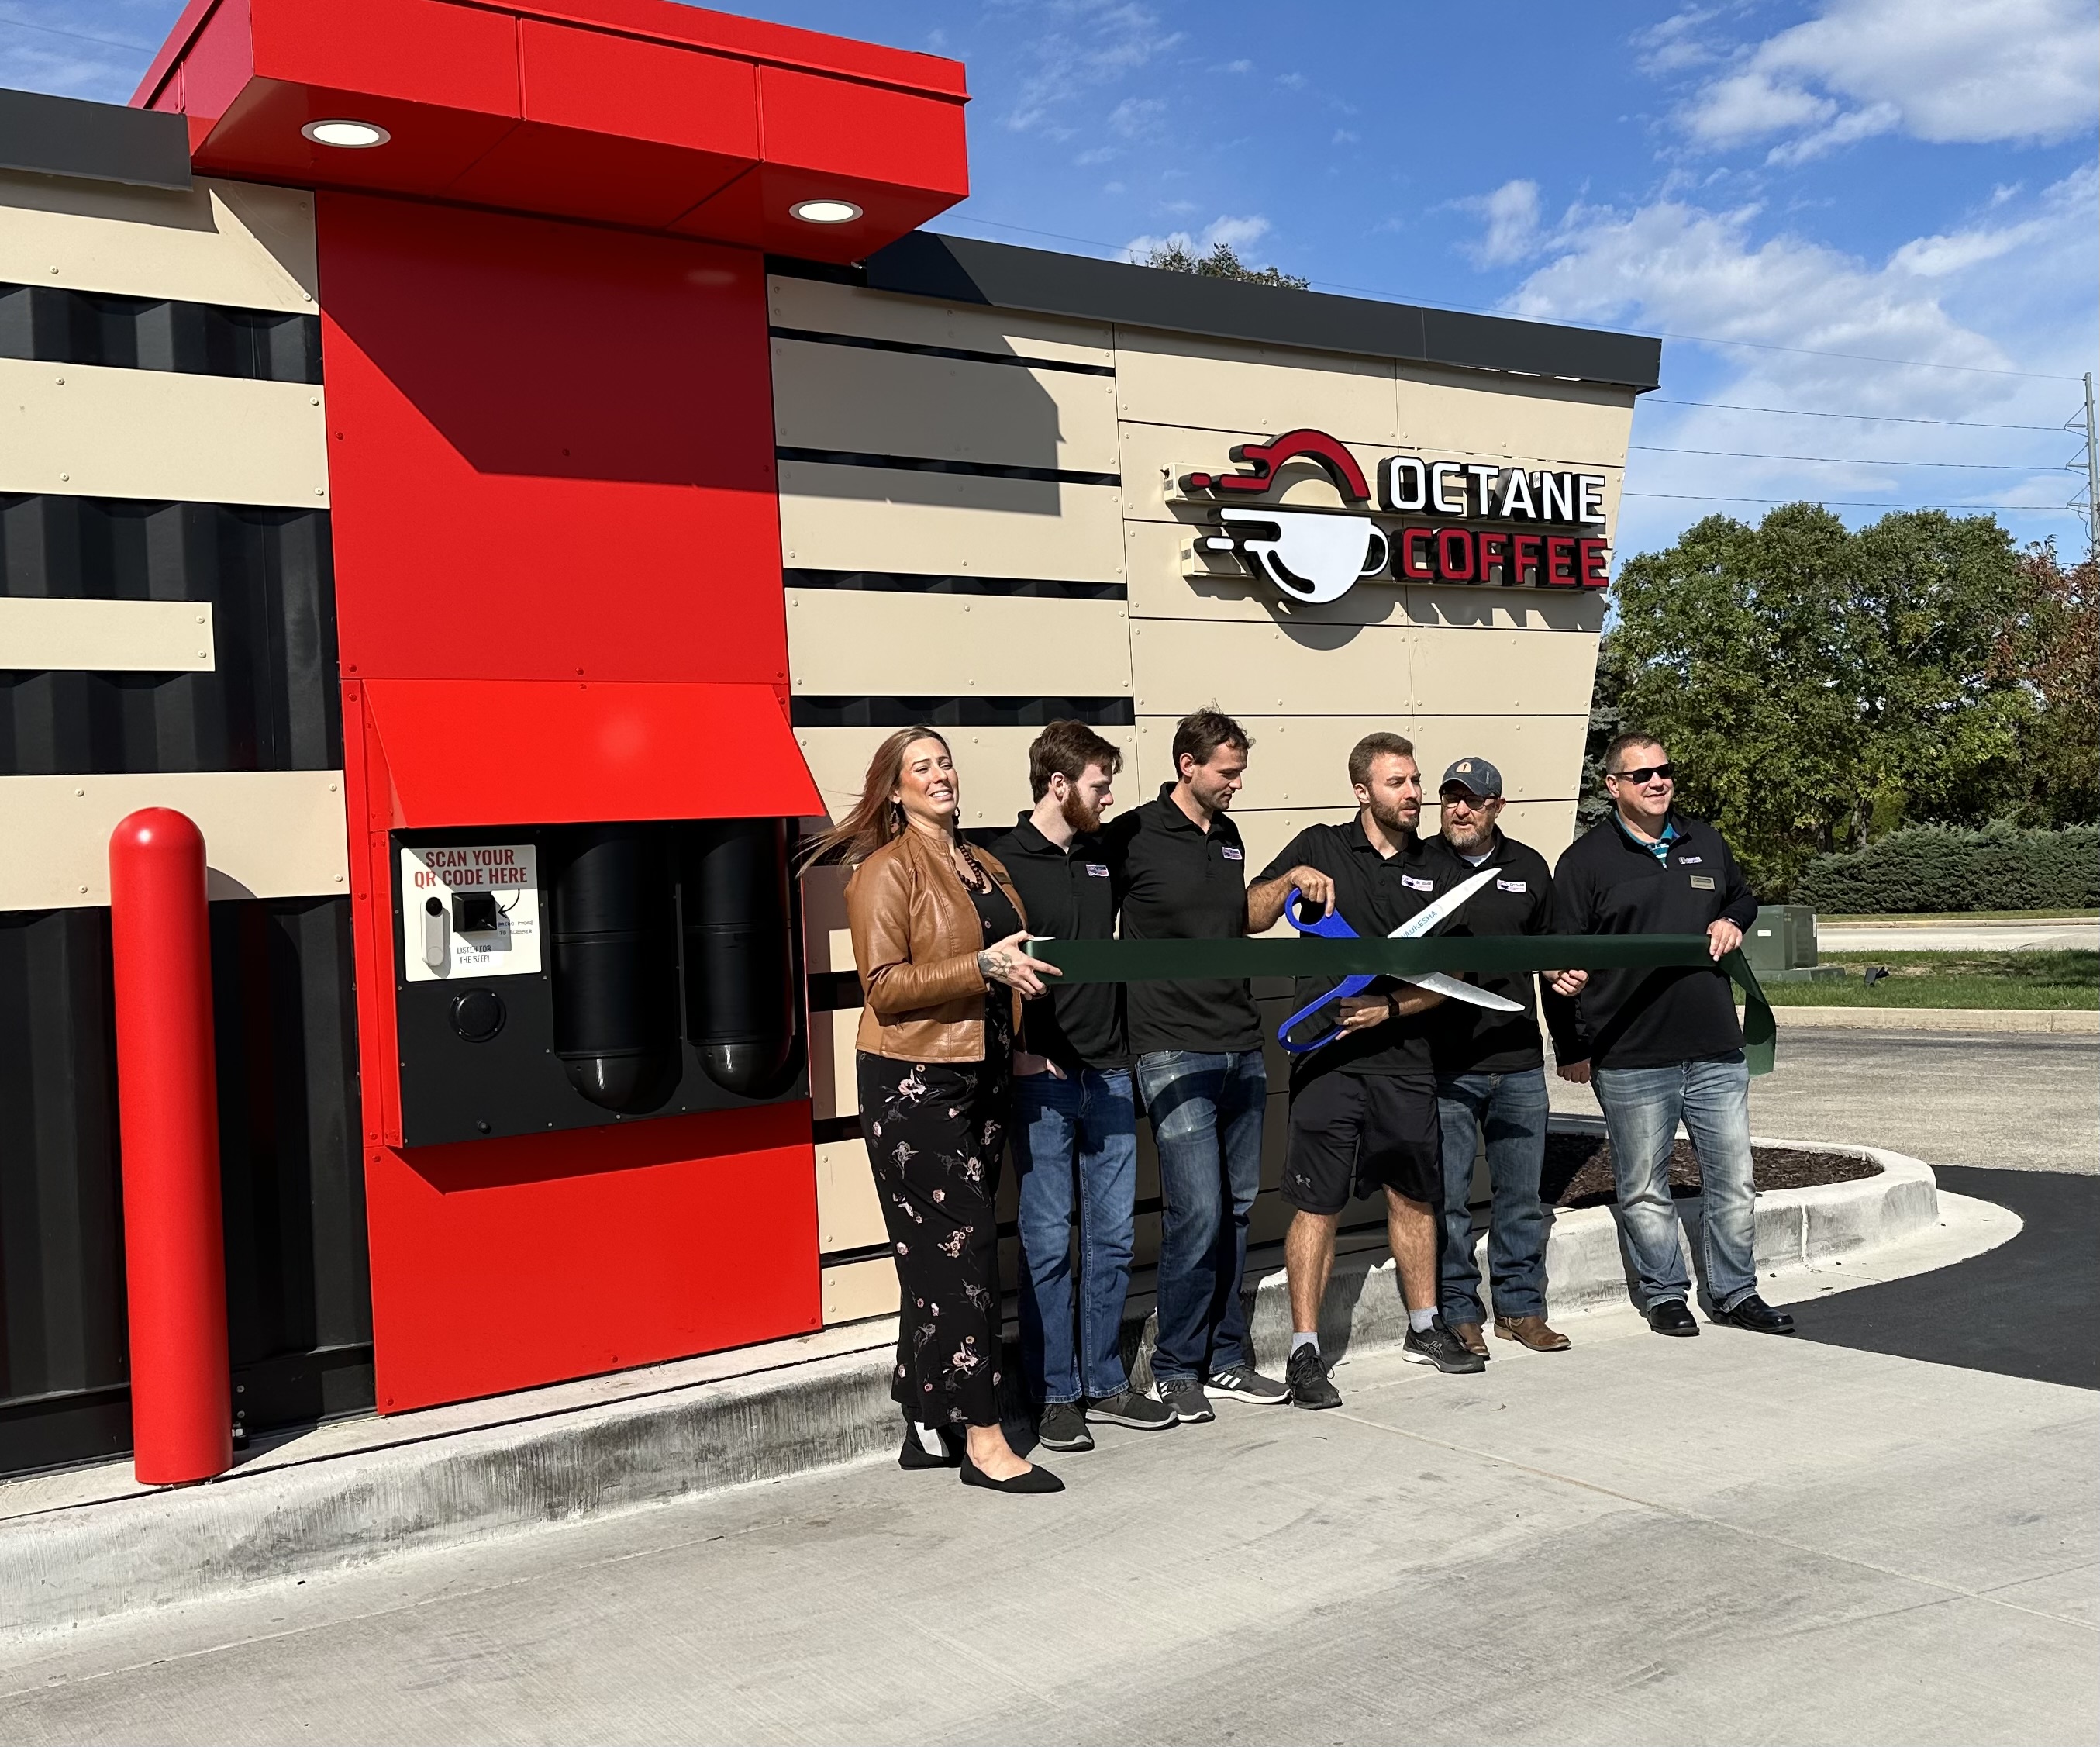 Six people stand in front of Octane Coffee kiosk.